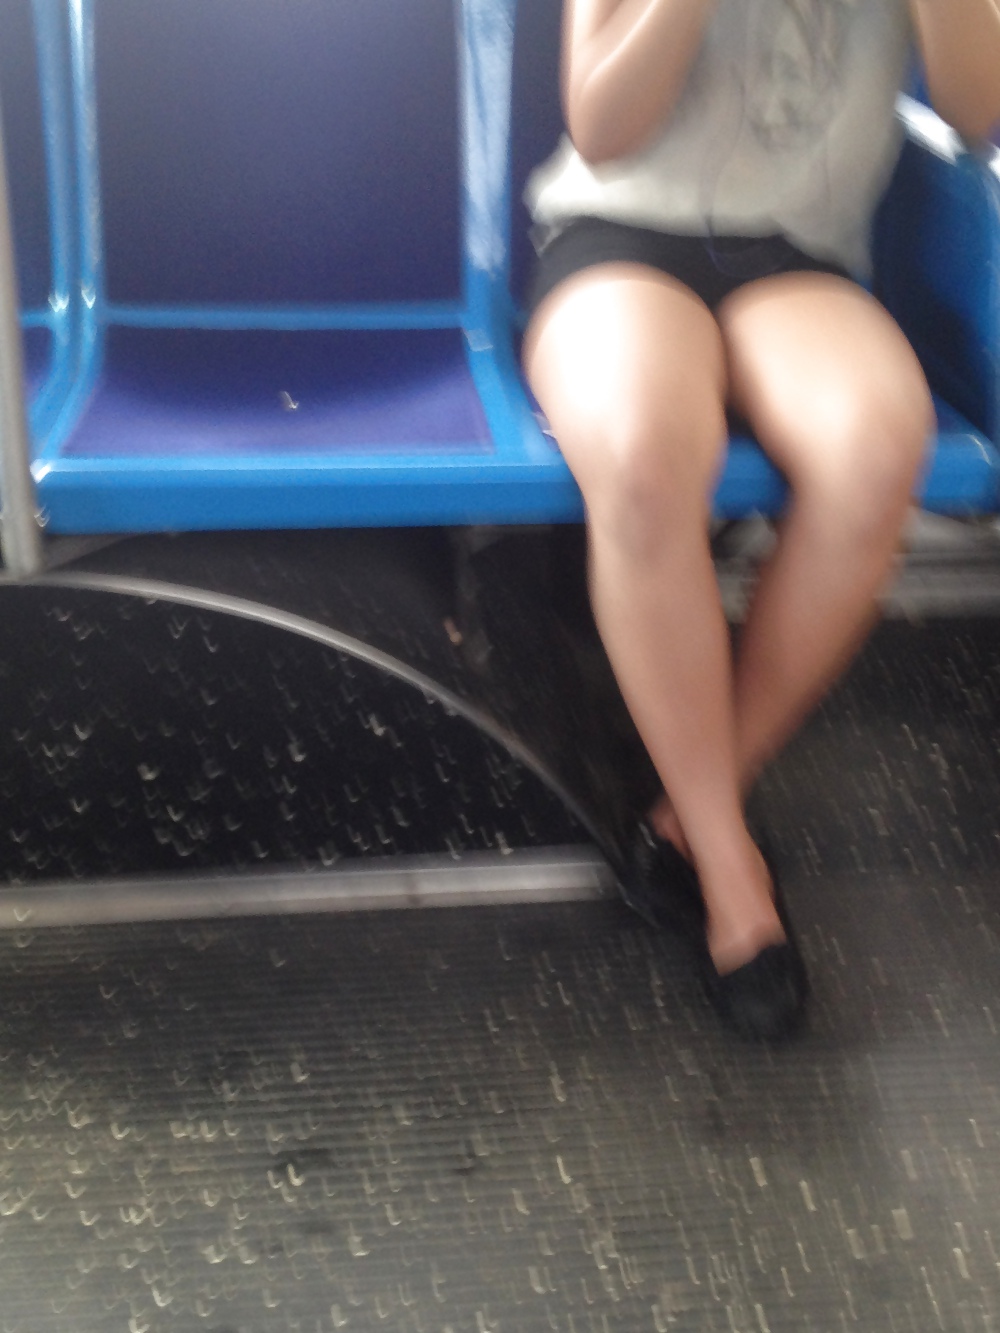 Just couldnt stop staring at her legs. #17542520